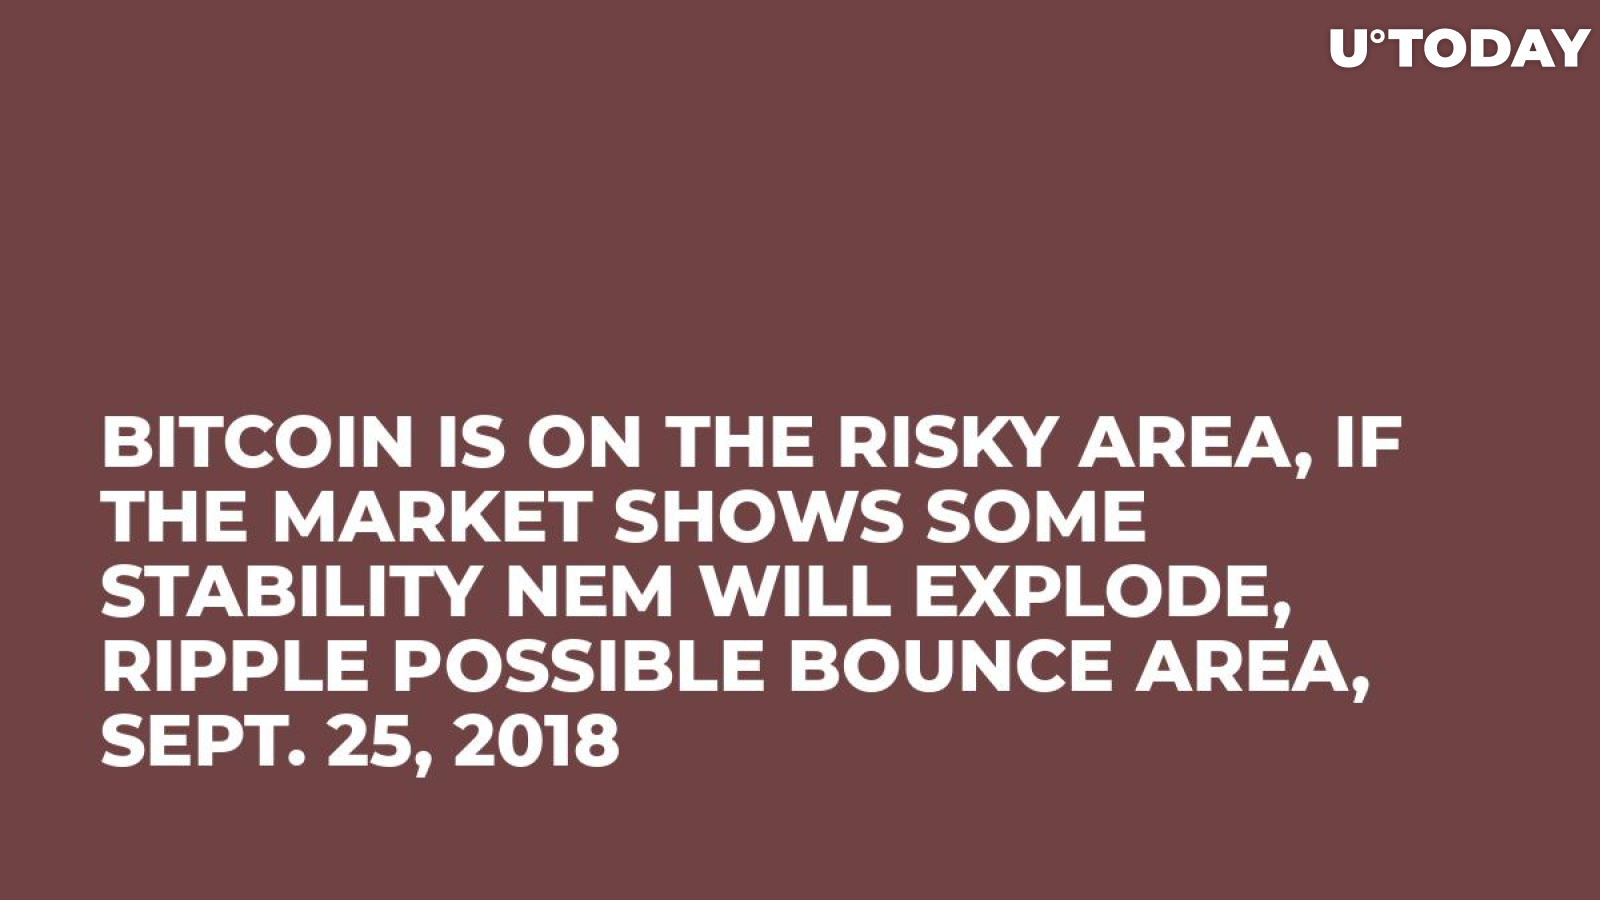 Bitcoin is on the Risky Area, If the Market Shows Some Stability NEM Will Explode, Ripple Possible Bounce Area, Sept. 25, 2018